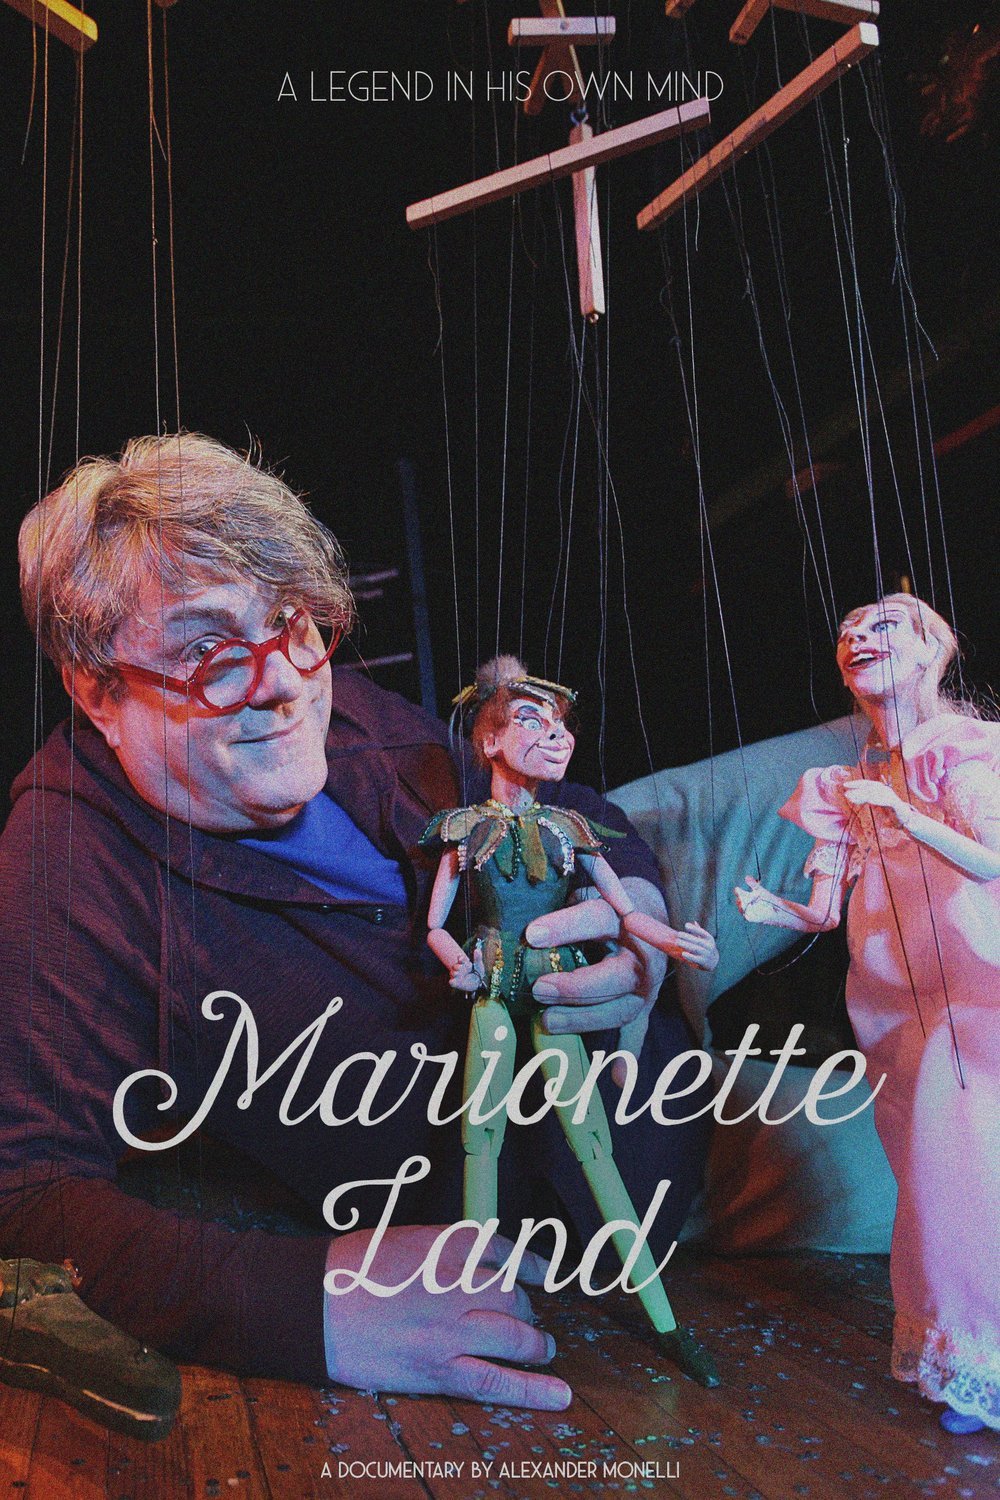 Poster of the movie Marionette Land